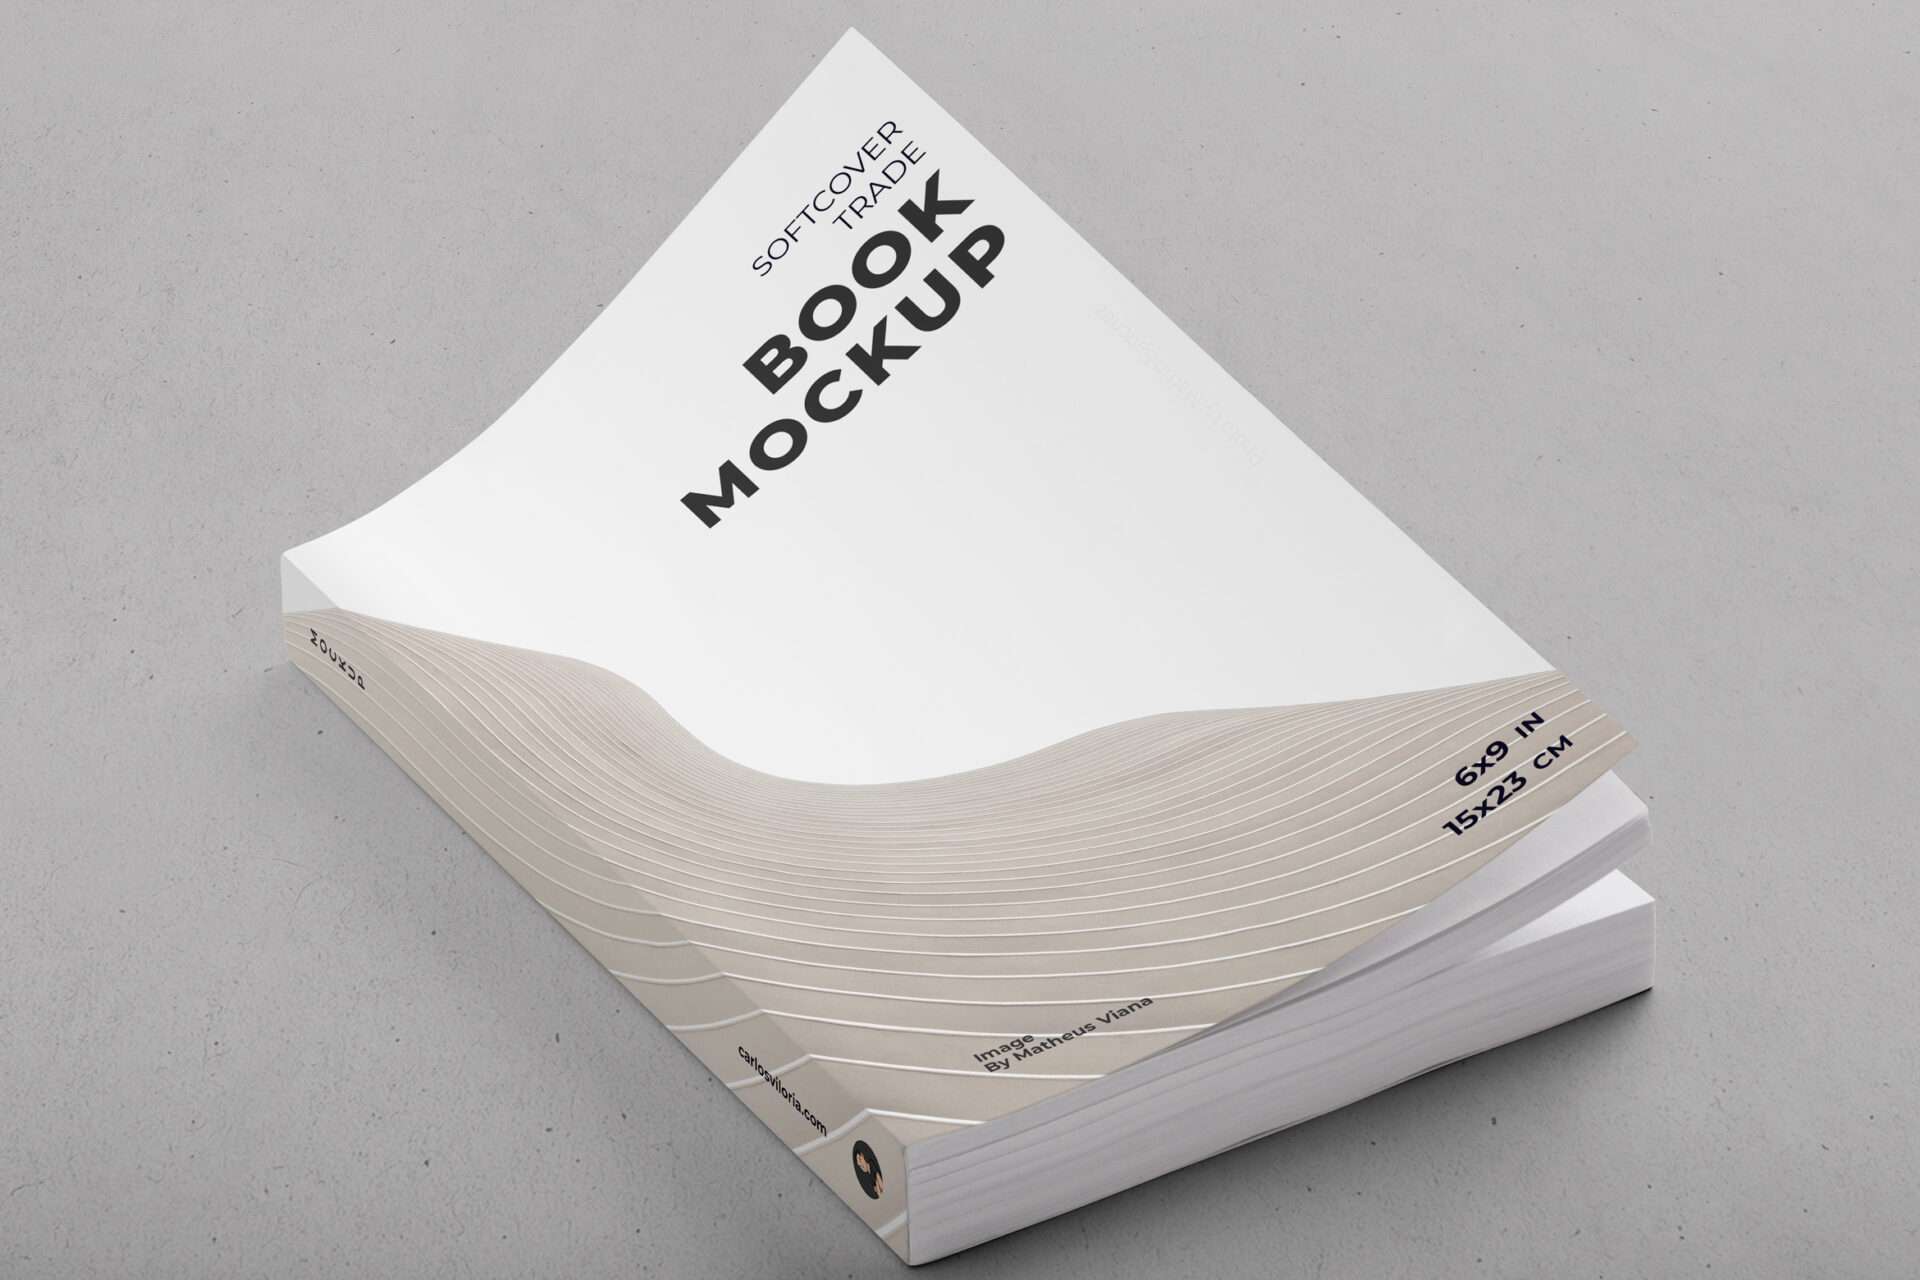 Softcover trade book 6x9 In mockup